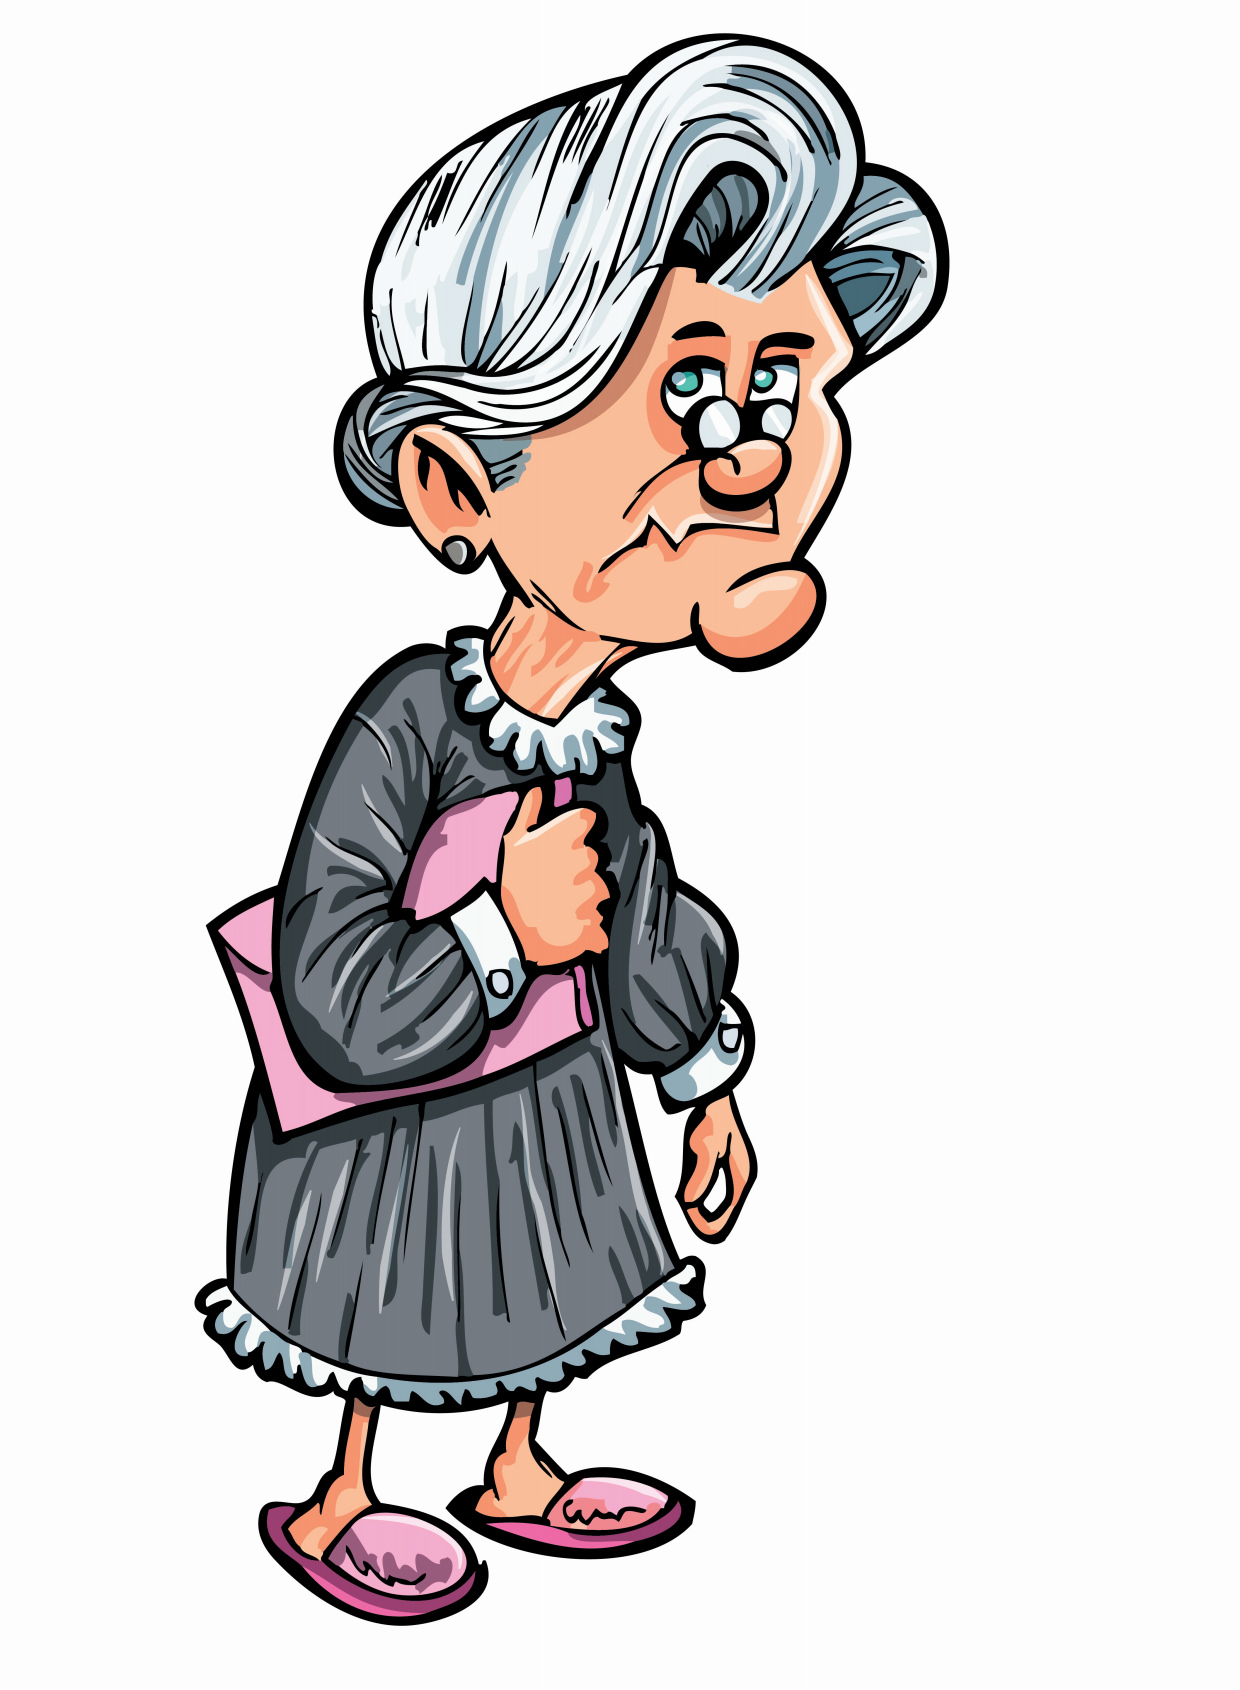 10 Cartoon Old Lady Pictures Free Cliparts That You Can Download To